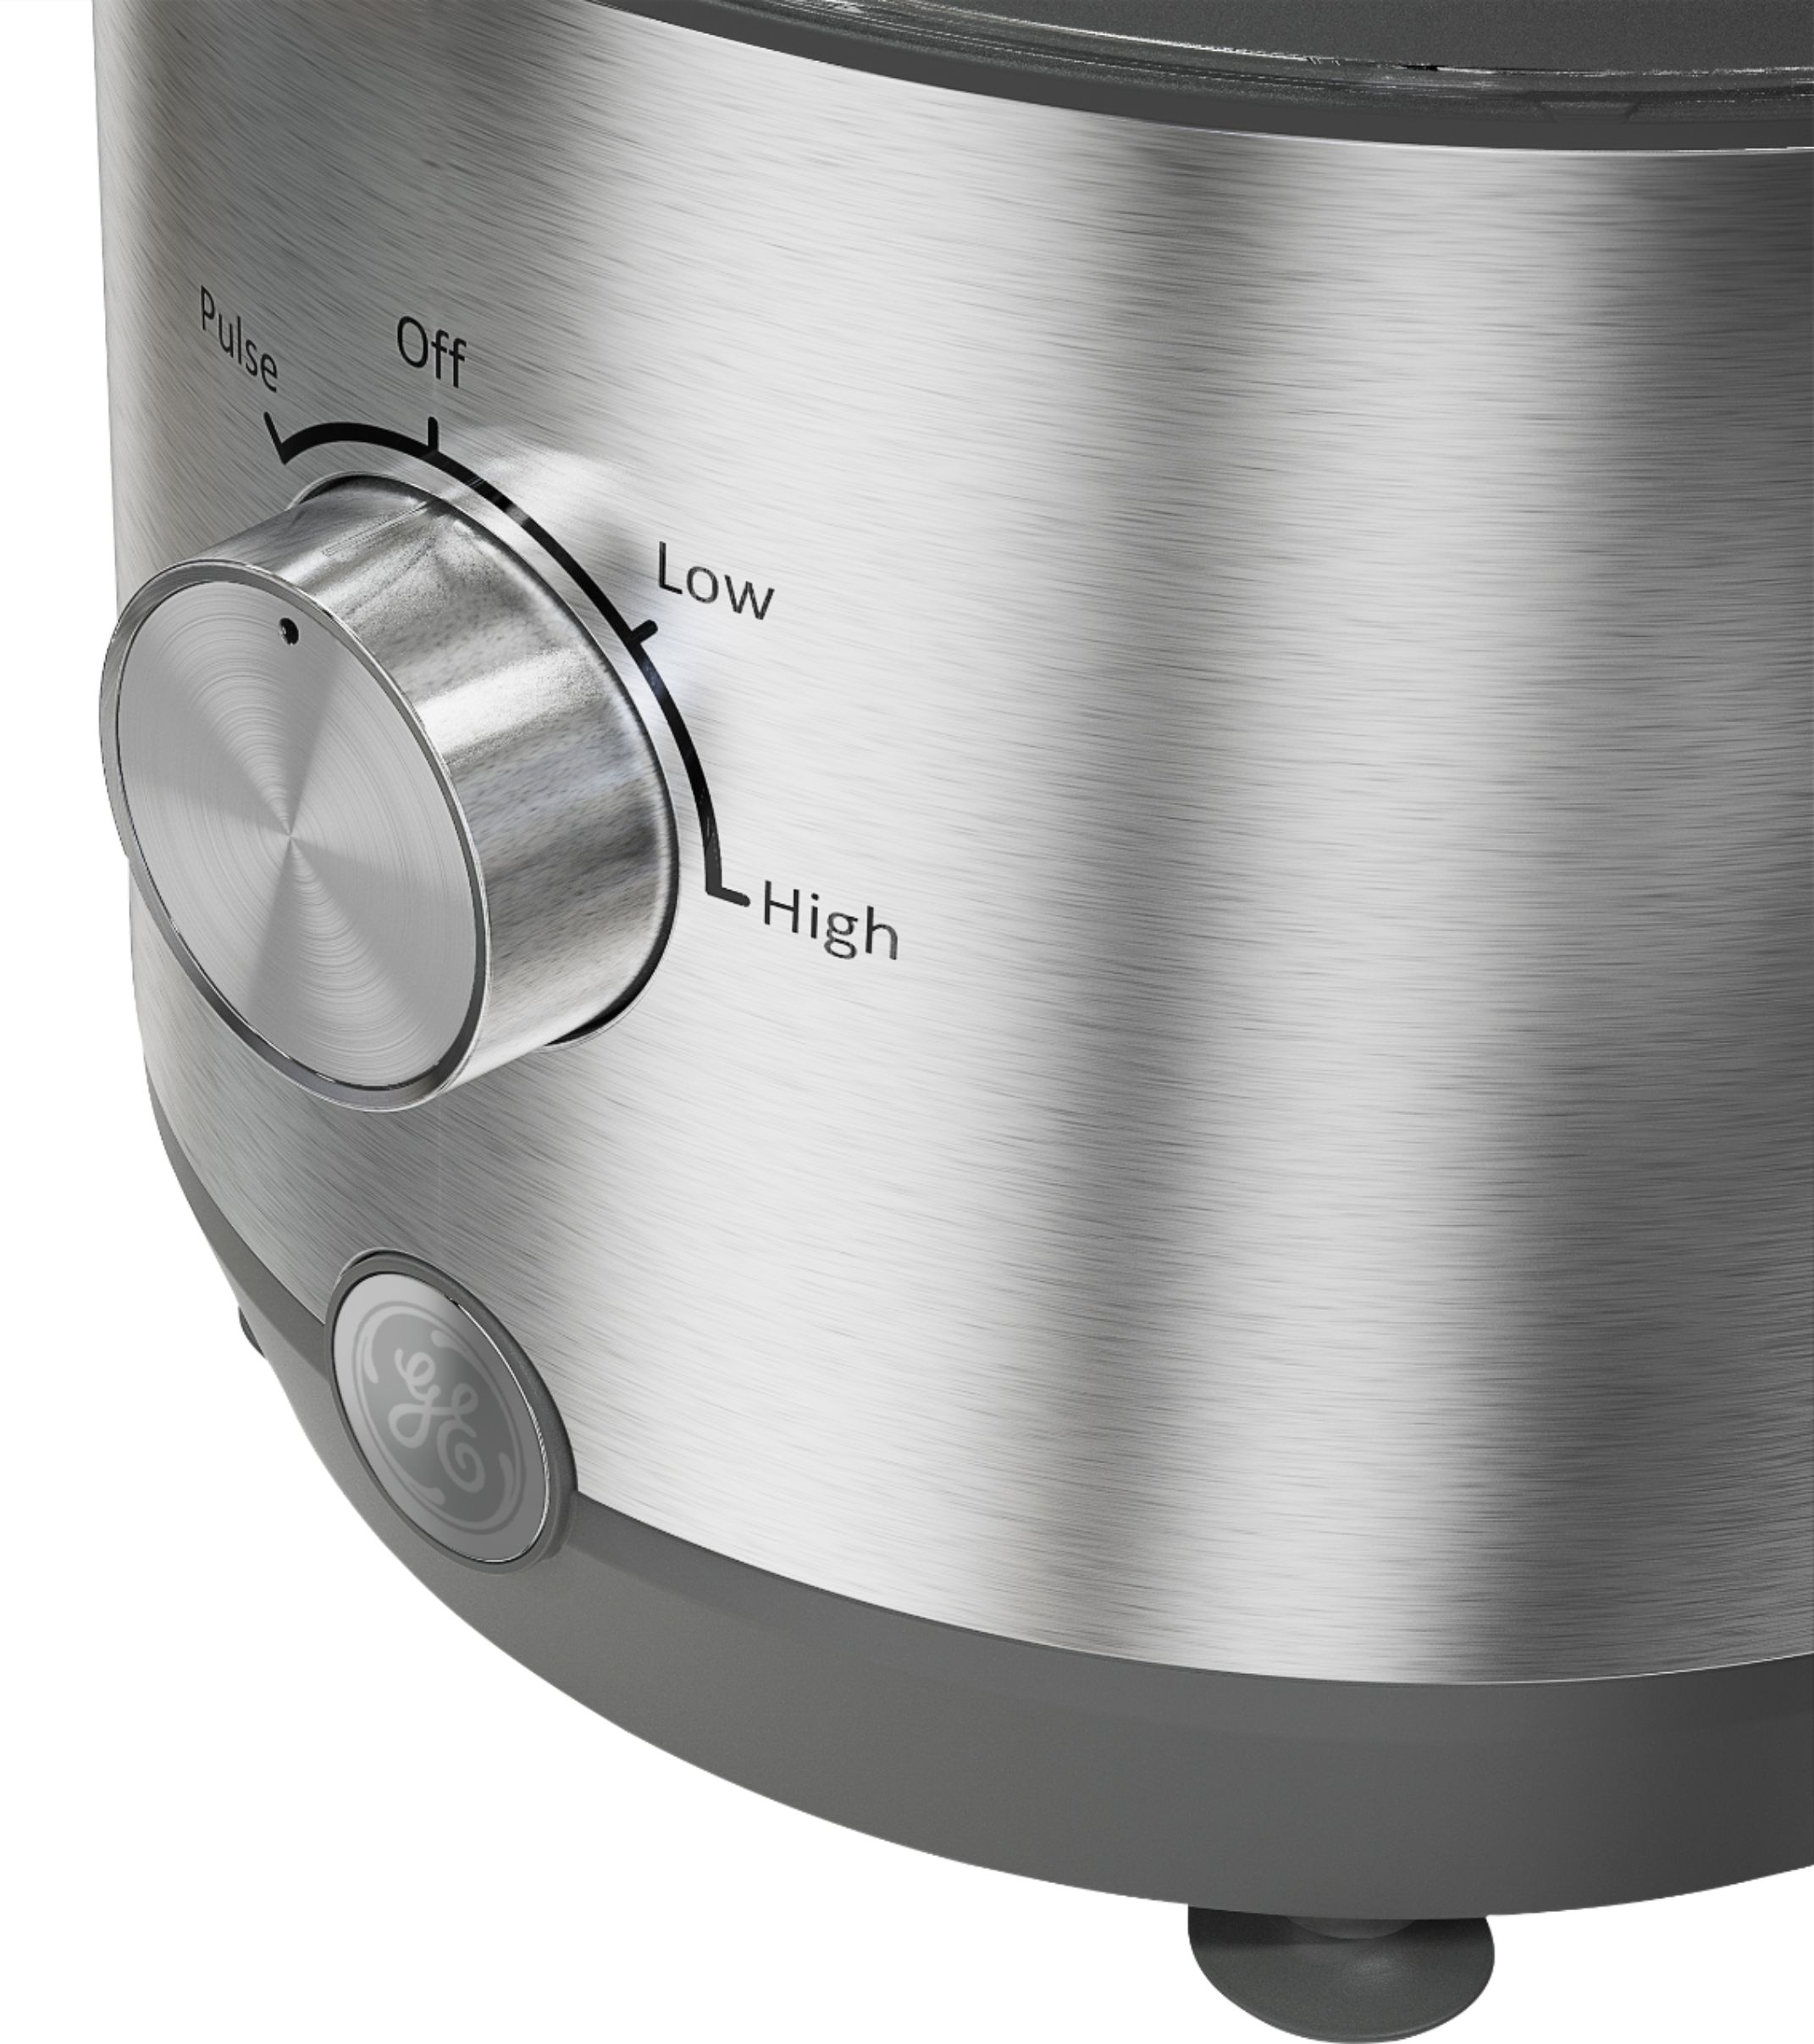 GE 12-Cup G8P0AASSPSS Food Processor & Chopper Review - Consumer Reports